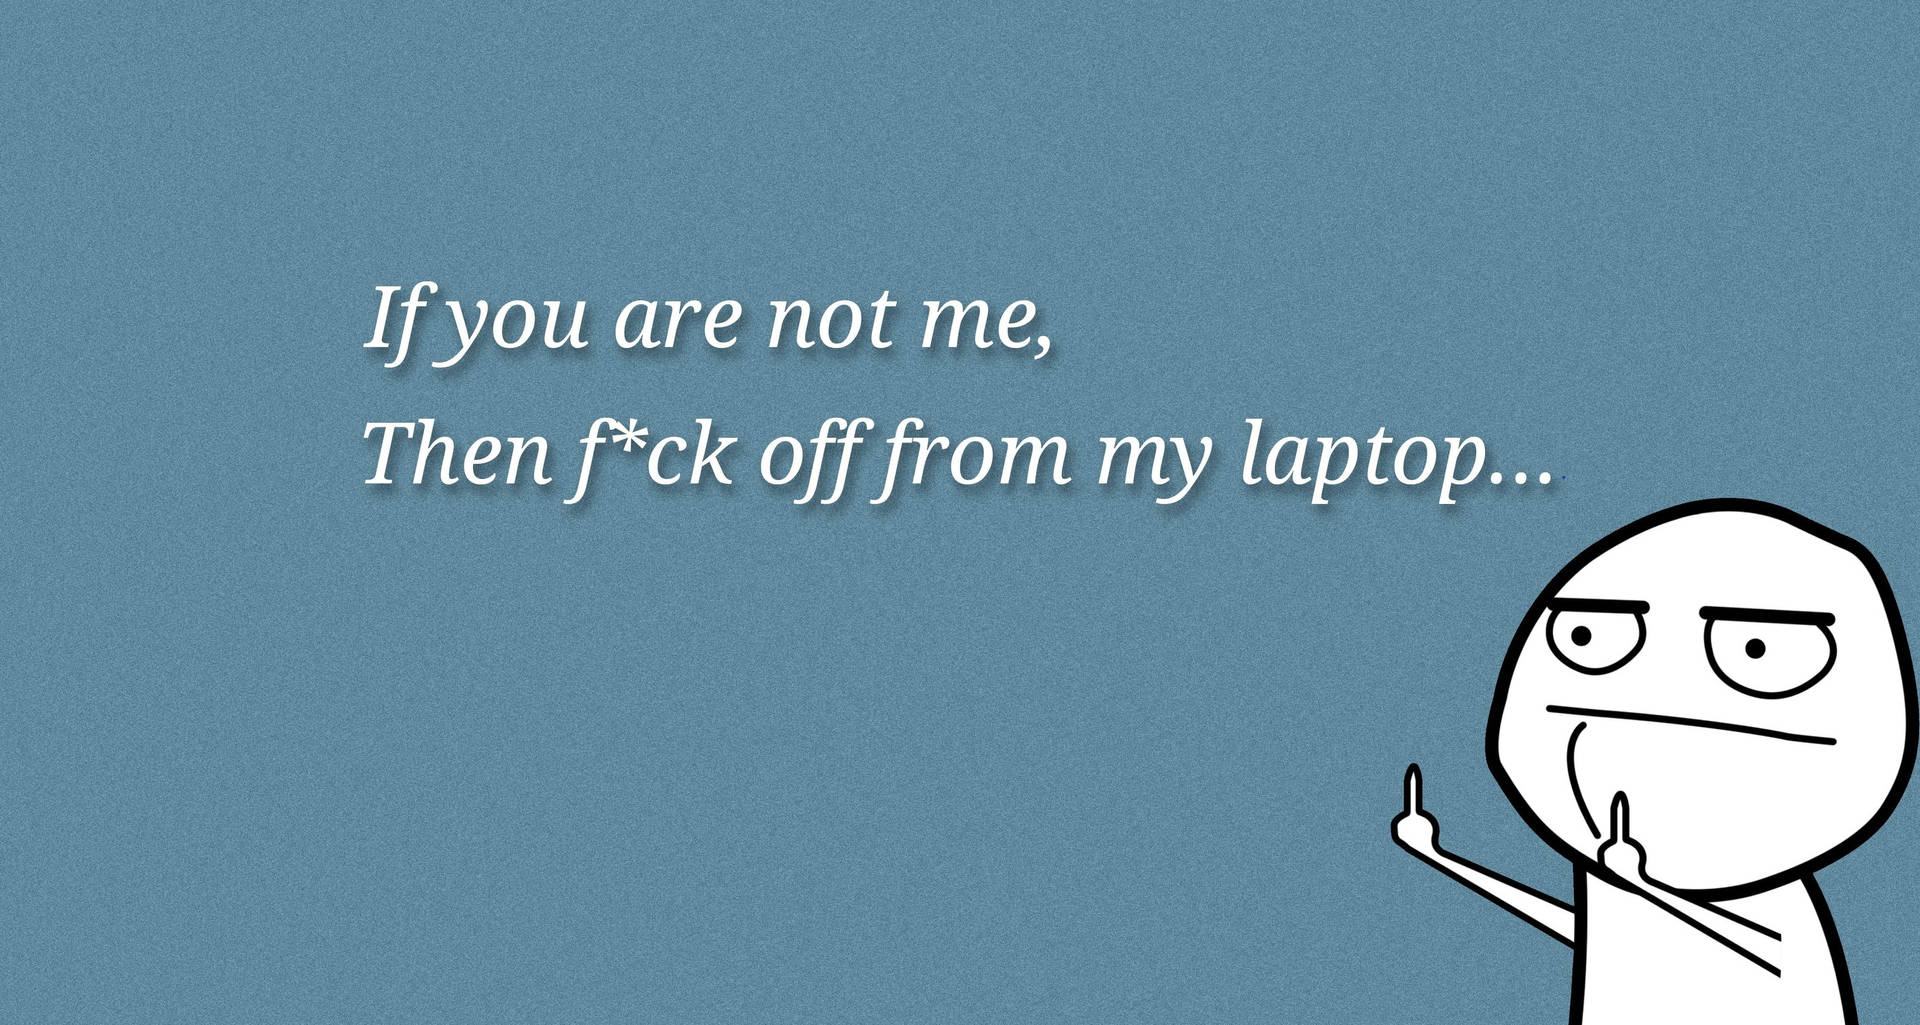 Free Funny Laptop Wallpaper Downloads, [100+] Funny Laptop Wallpapers for  FREE 